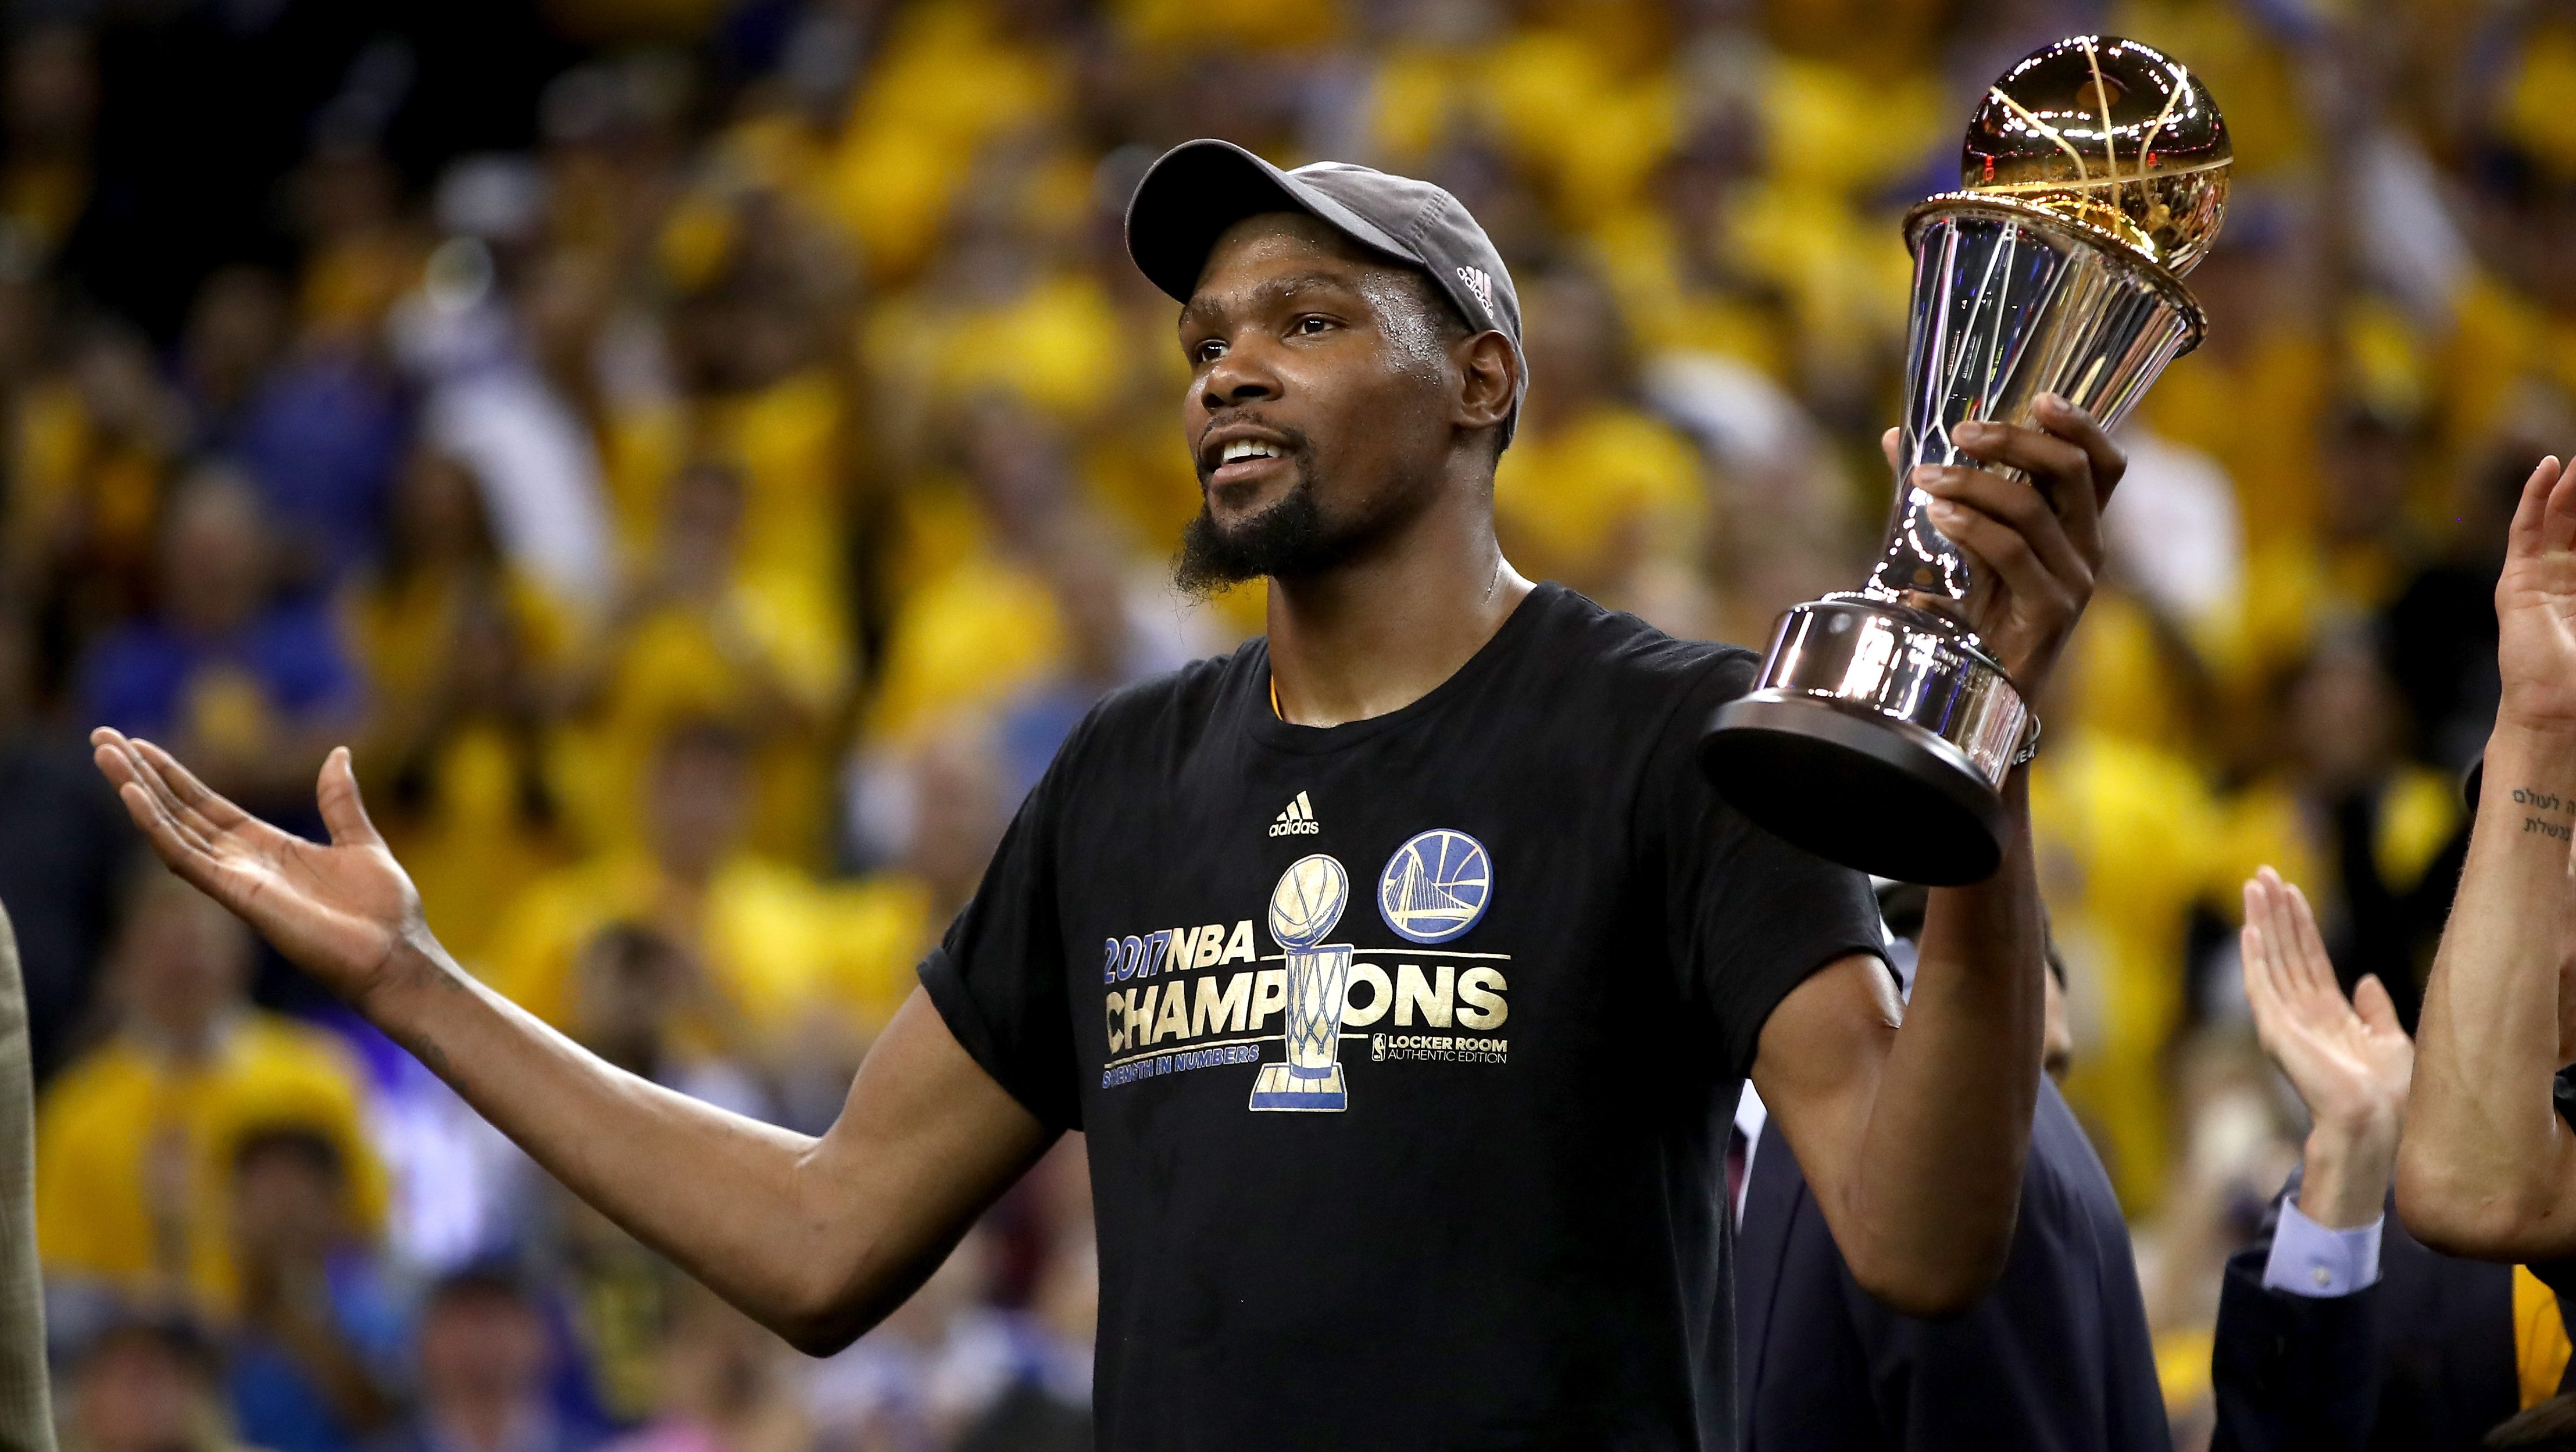 WATCH: Kevin Durant Nike Commercial After Championship |